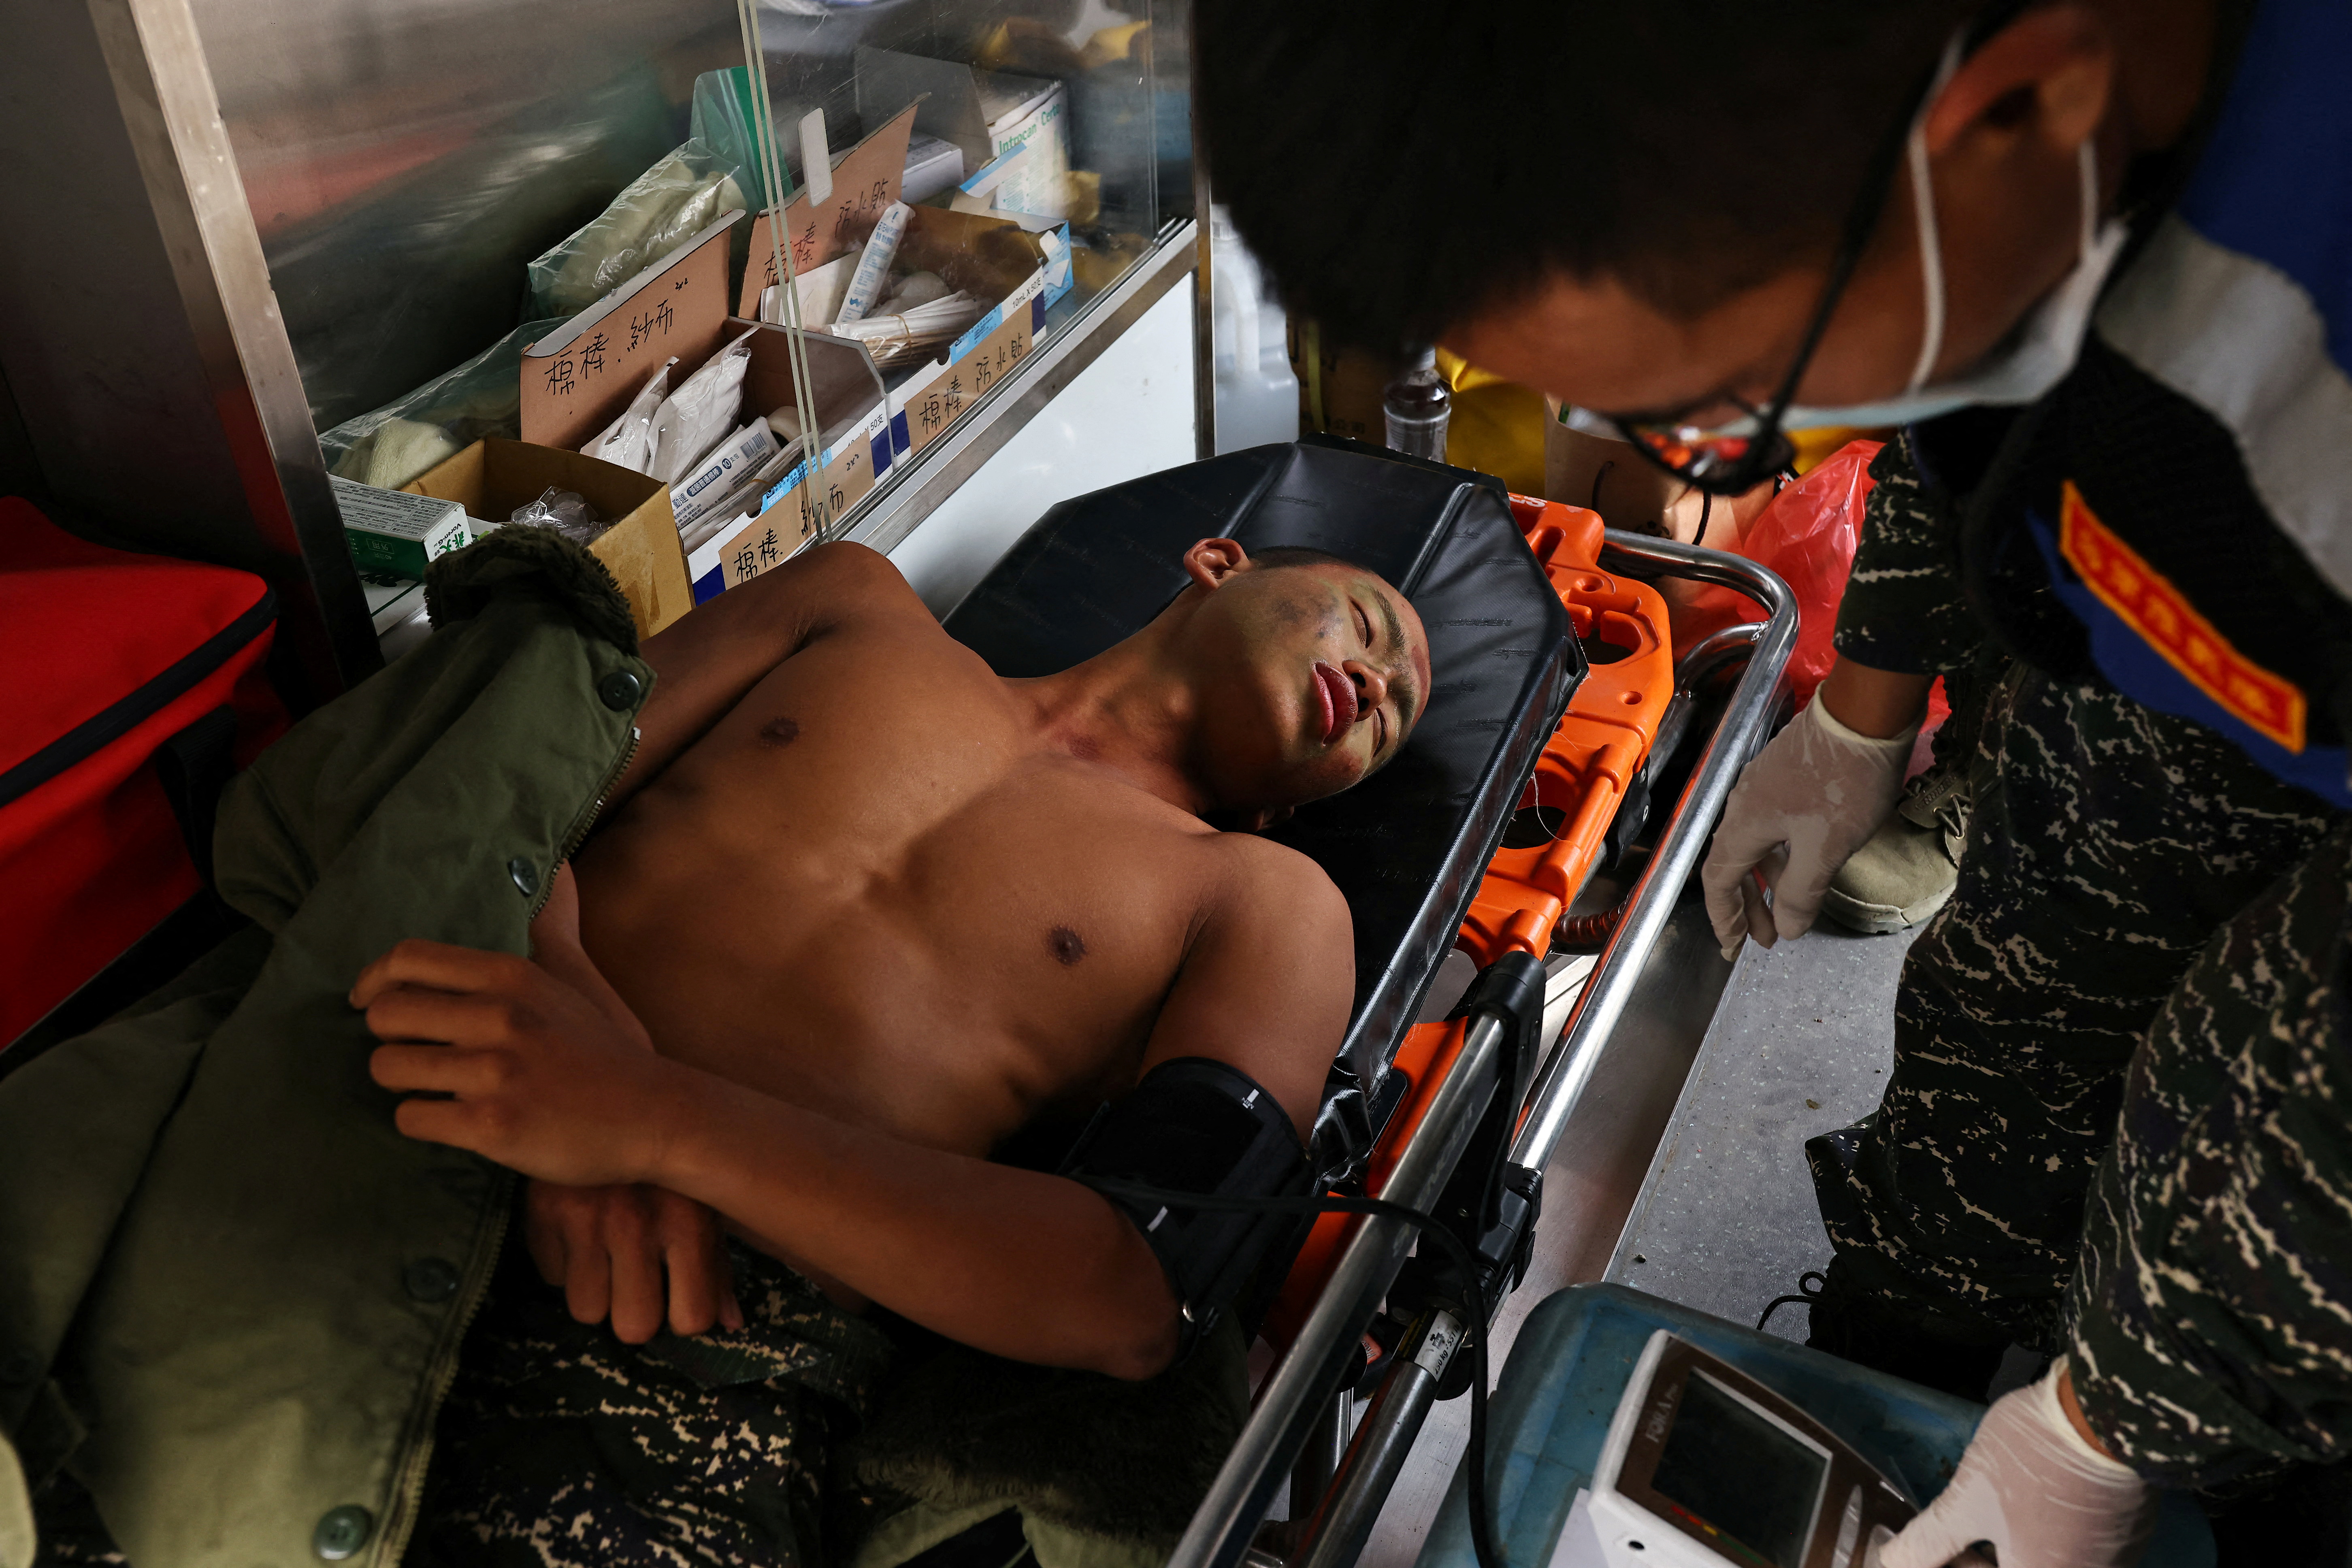 The Wider Image: Inside Taiwan's brutal navy frogmen bootcamp